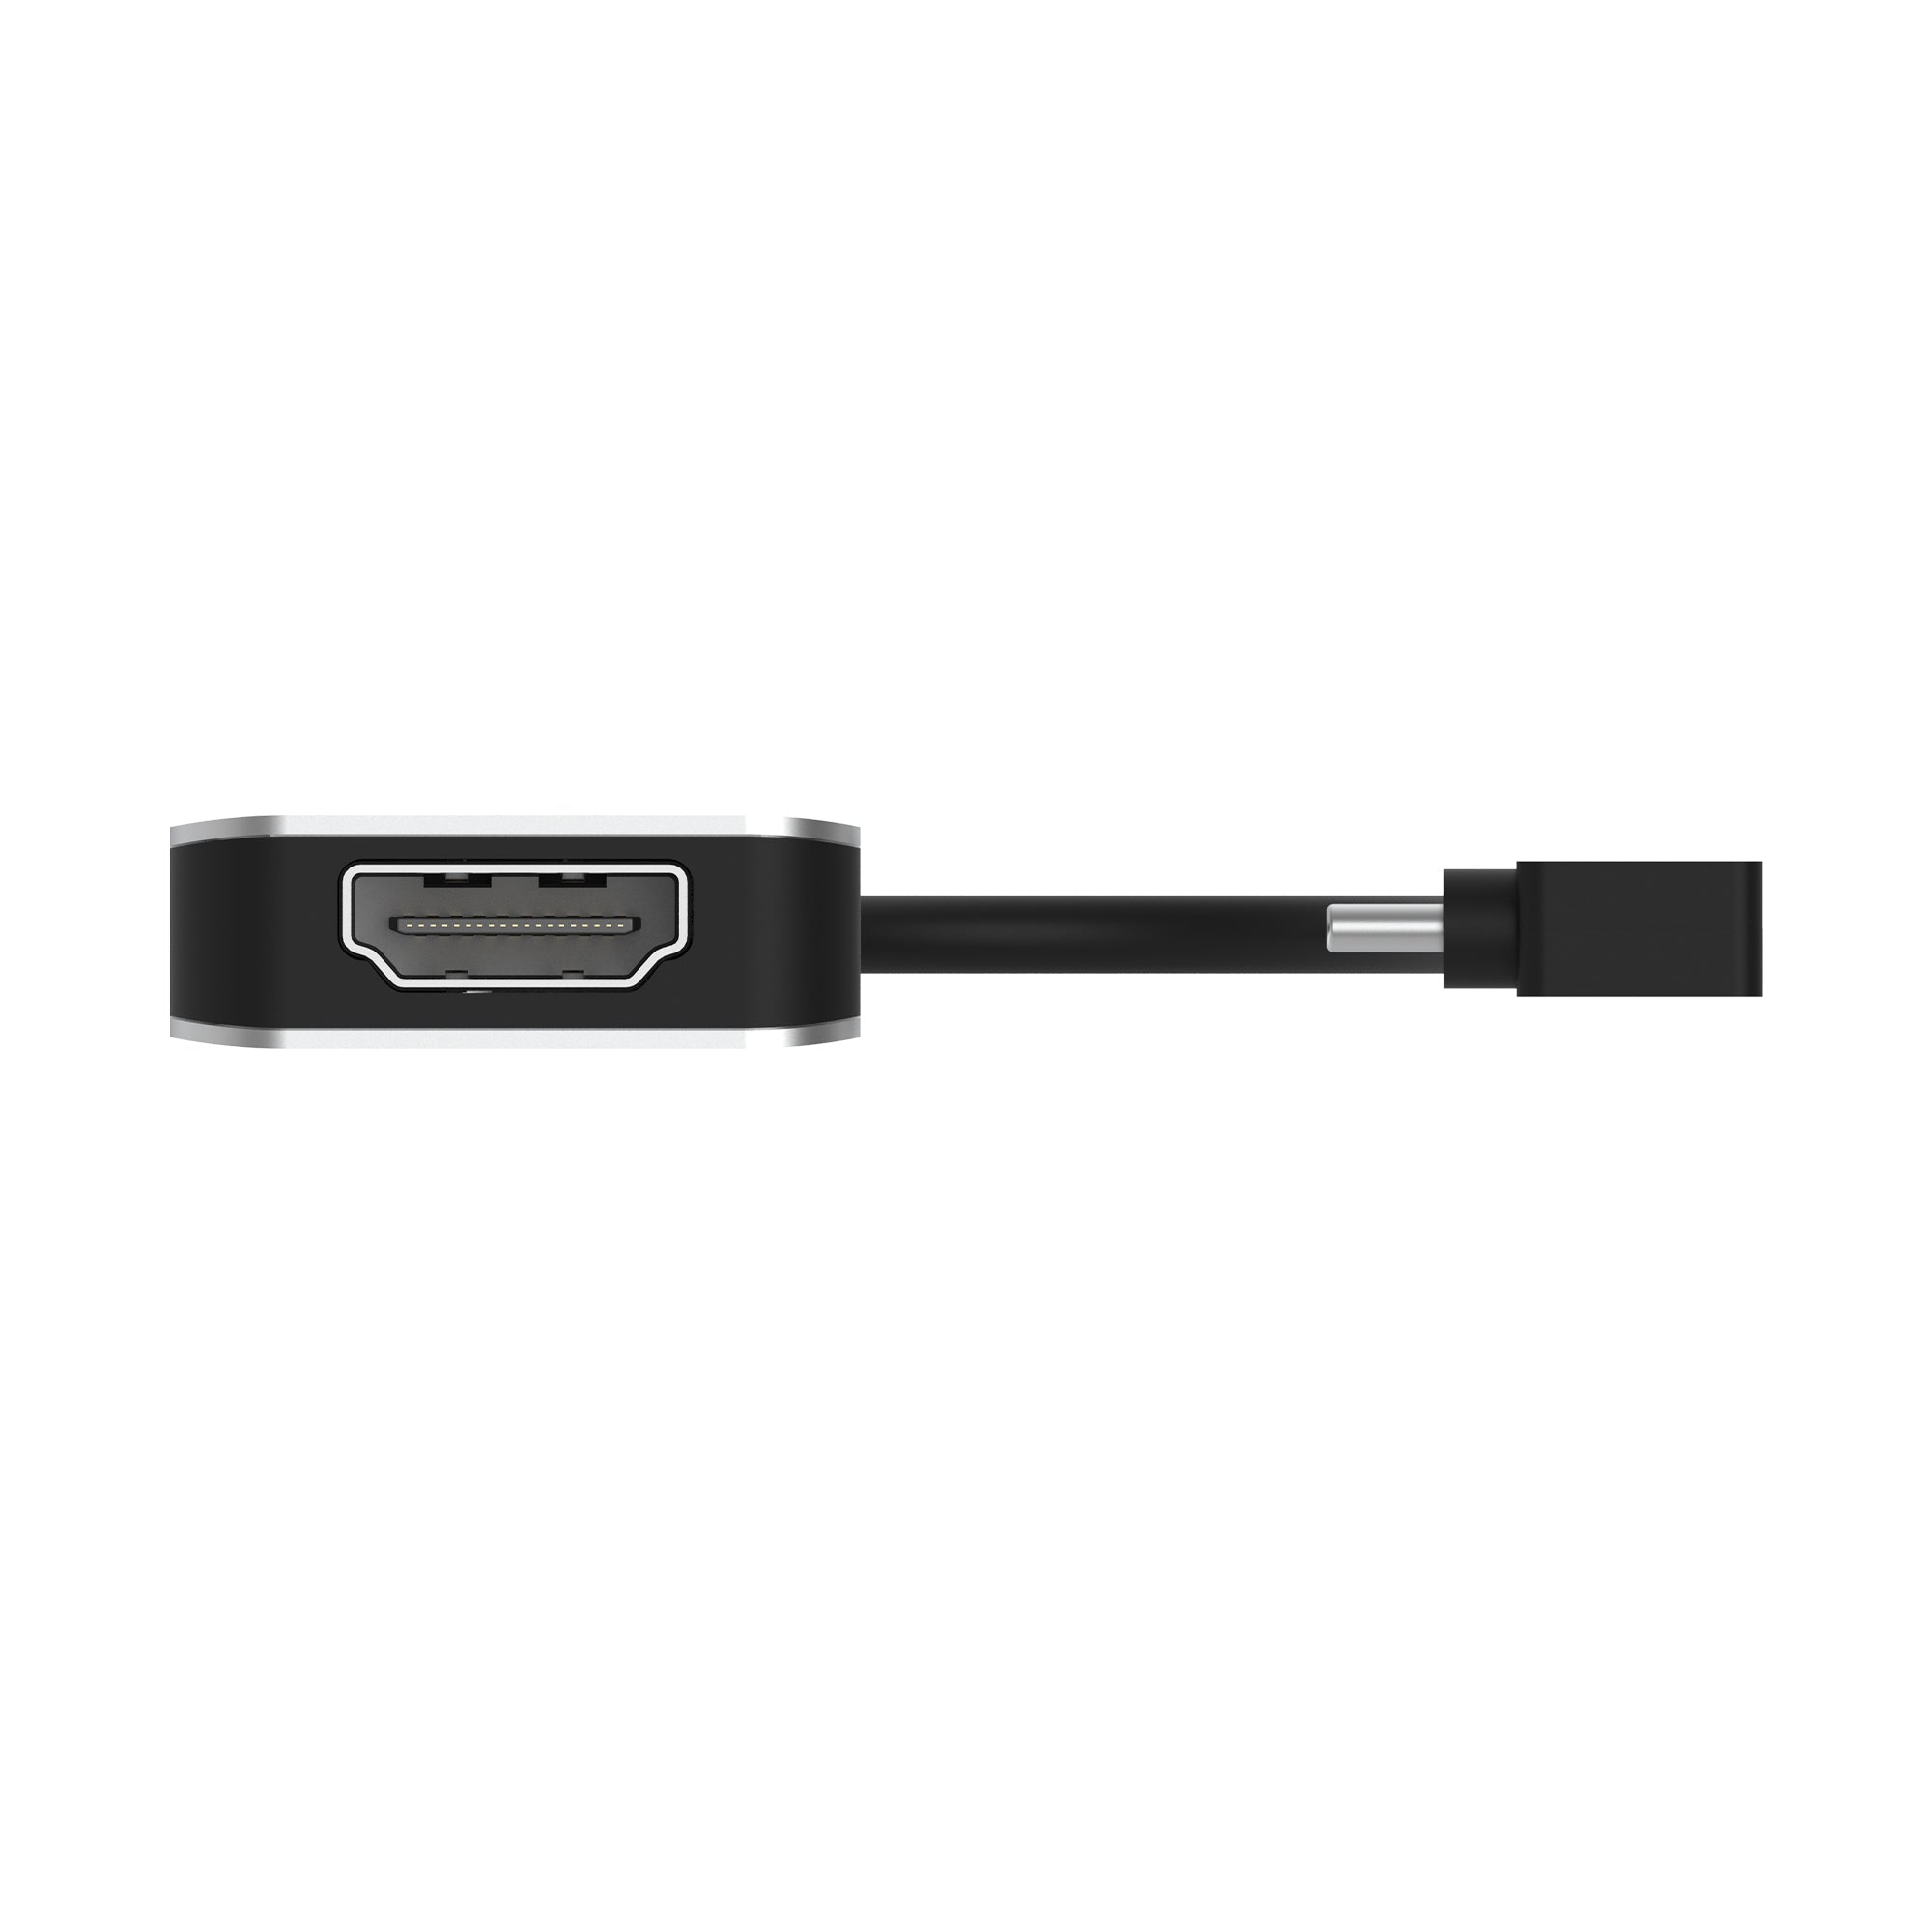 j5create USB-C Multi-Adapter for Surface Pro 8 Silver JCD372S - Best Buy